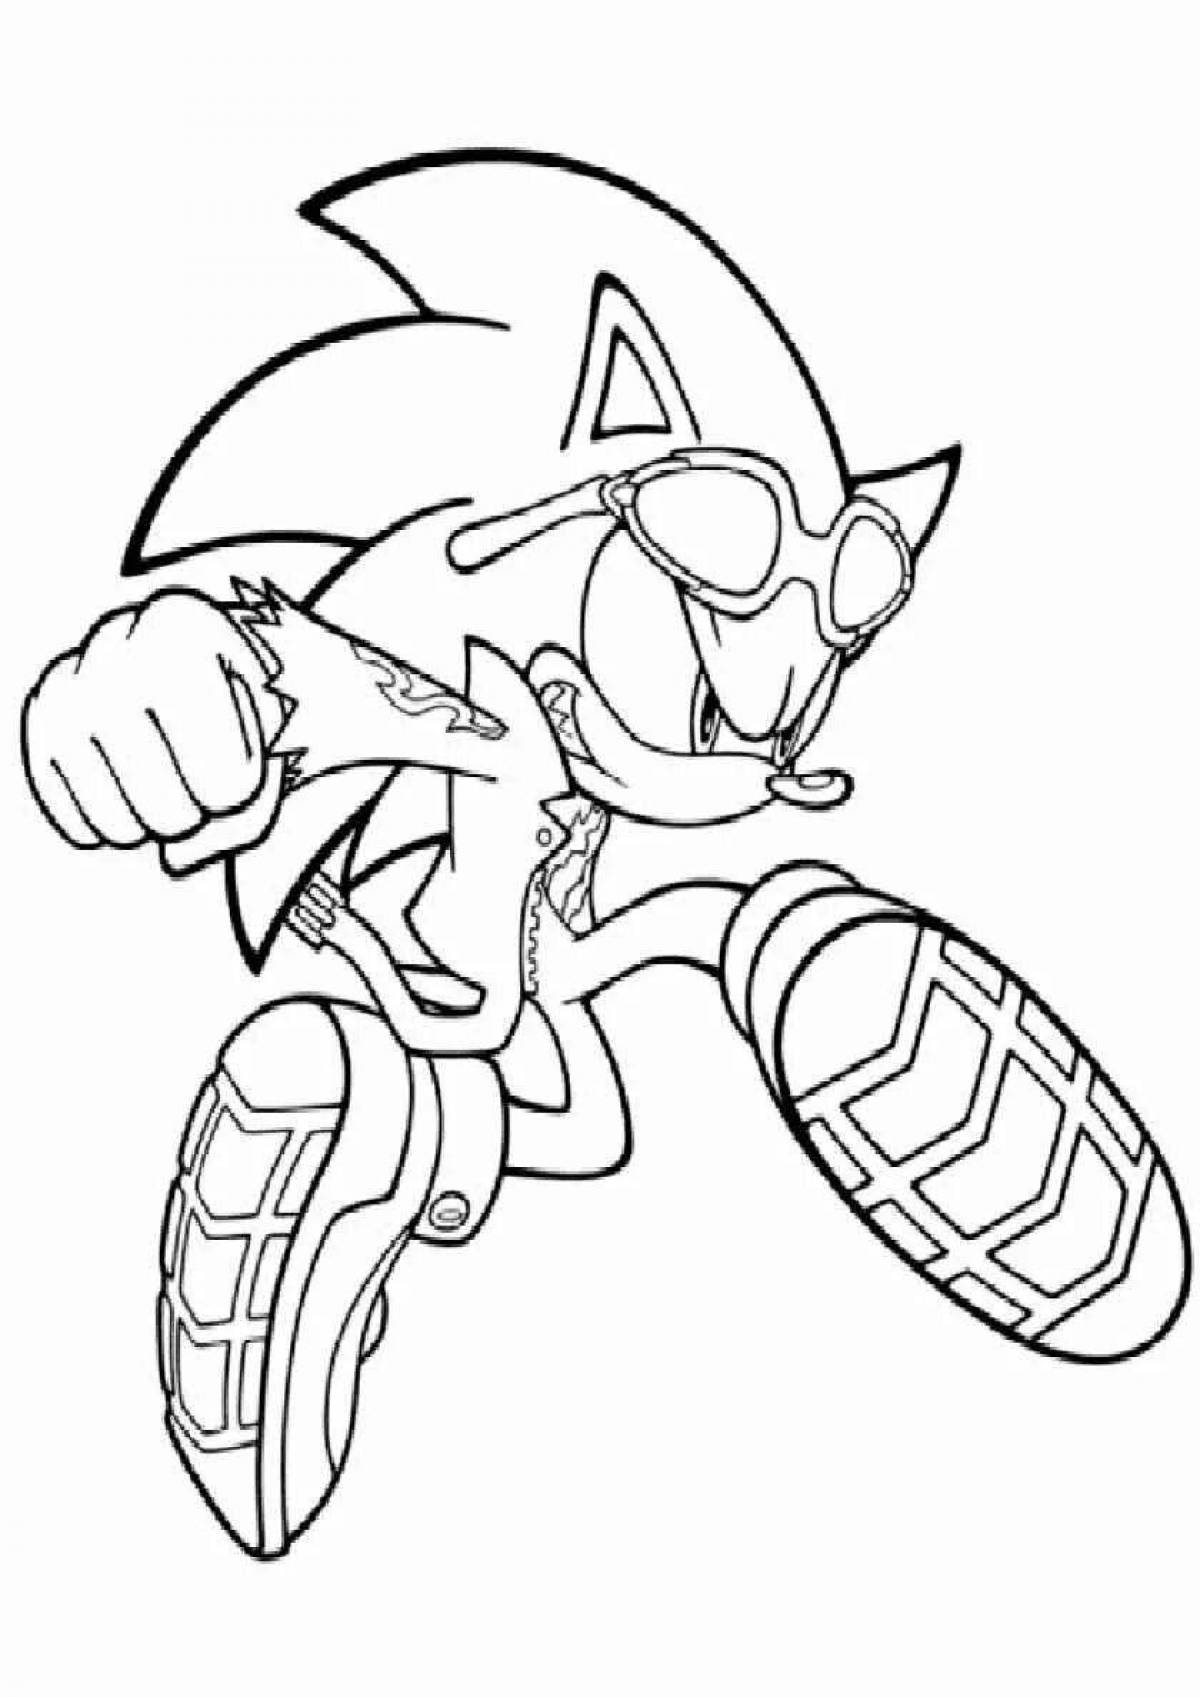 Outstanding darkspine sonic coloring page